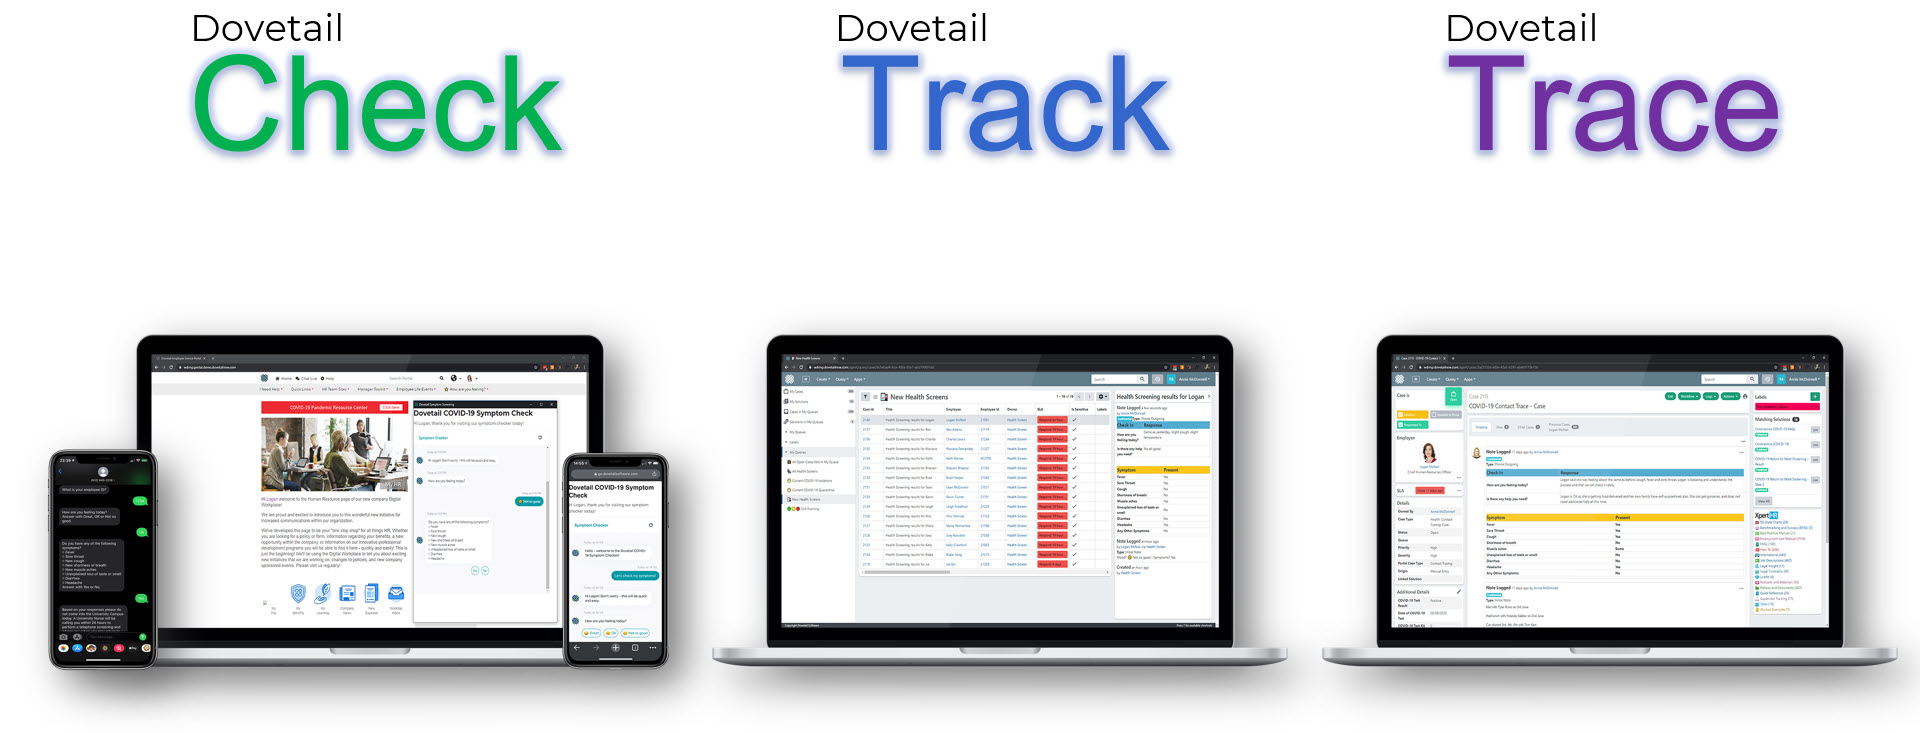 Dovetail Check Track Trace-1